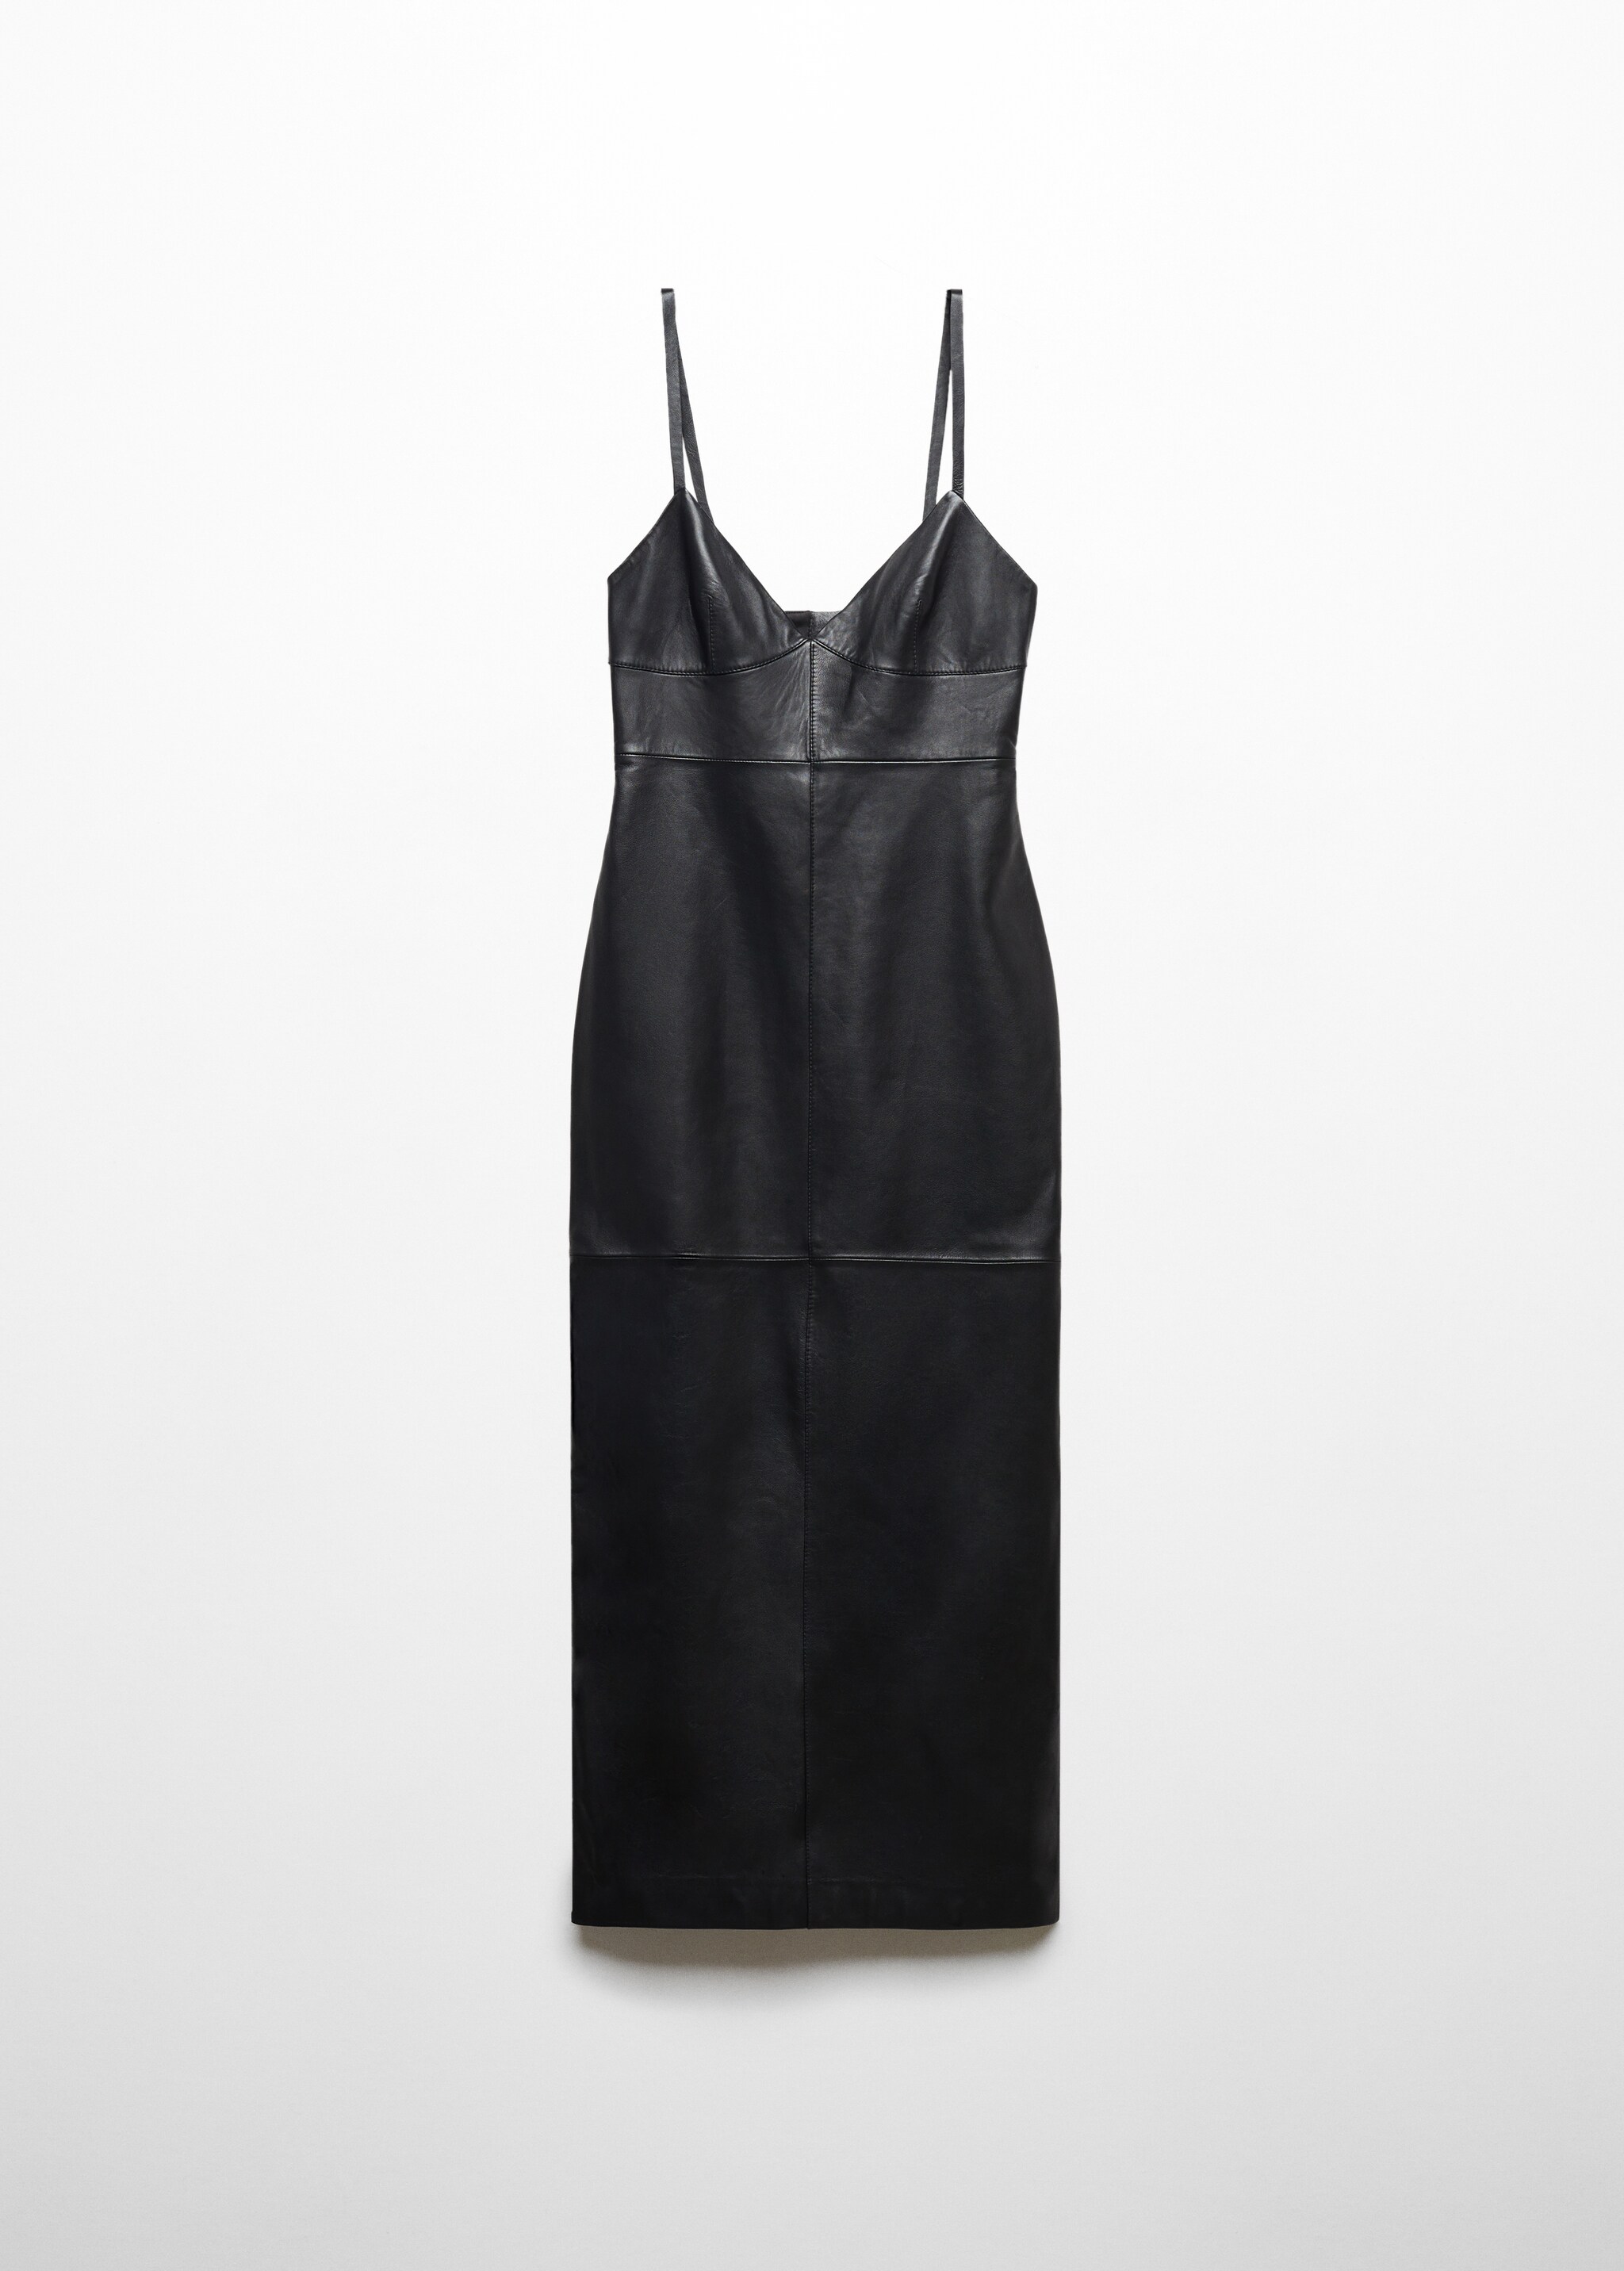 Leather dress with straps - Article without model